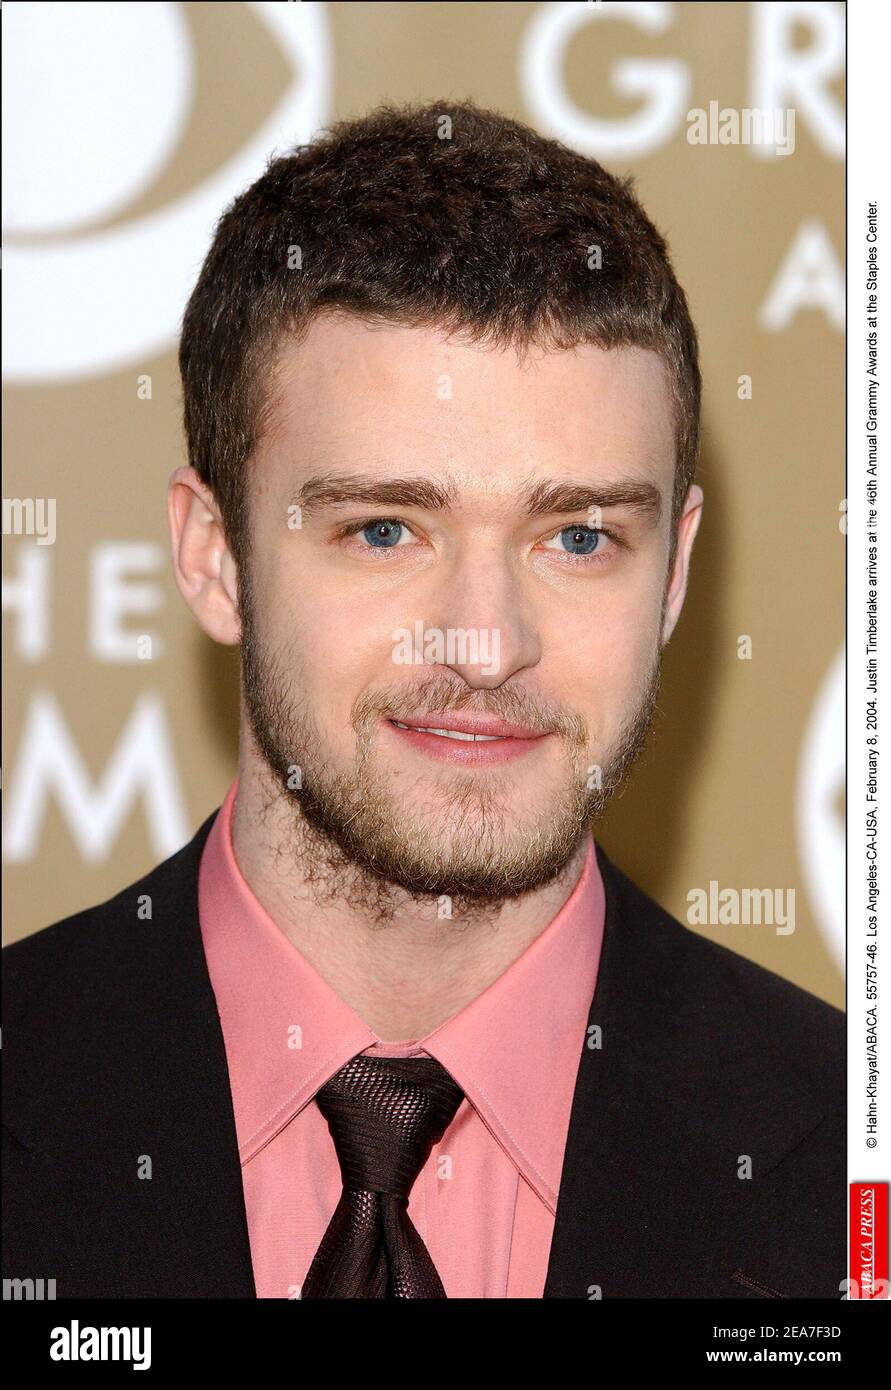 © Hahn-Khayat/ABACA. 55757-46. Los Angeles-CA-USA, February 8, 2004. Justin Timberlake arrives at the 46th Annual Grammy Awards at the Staples Center. Stock Photo